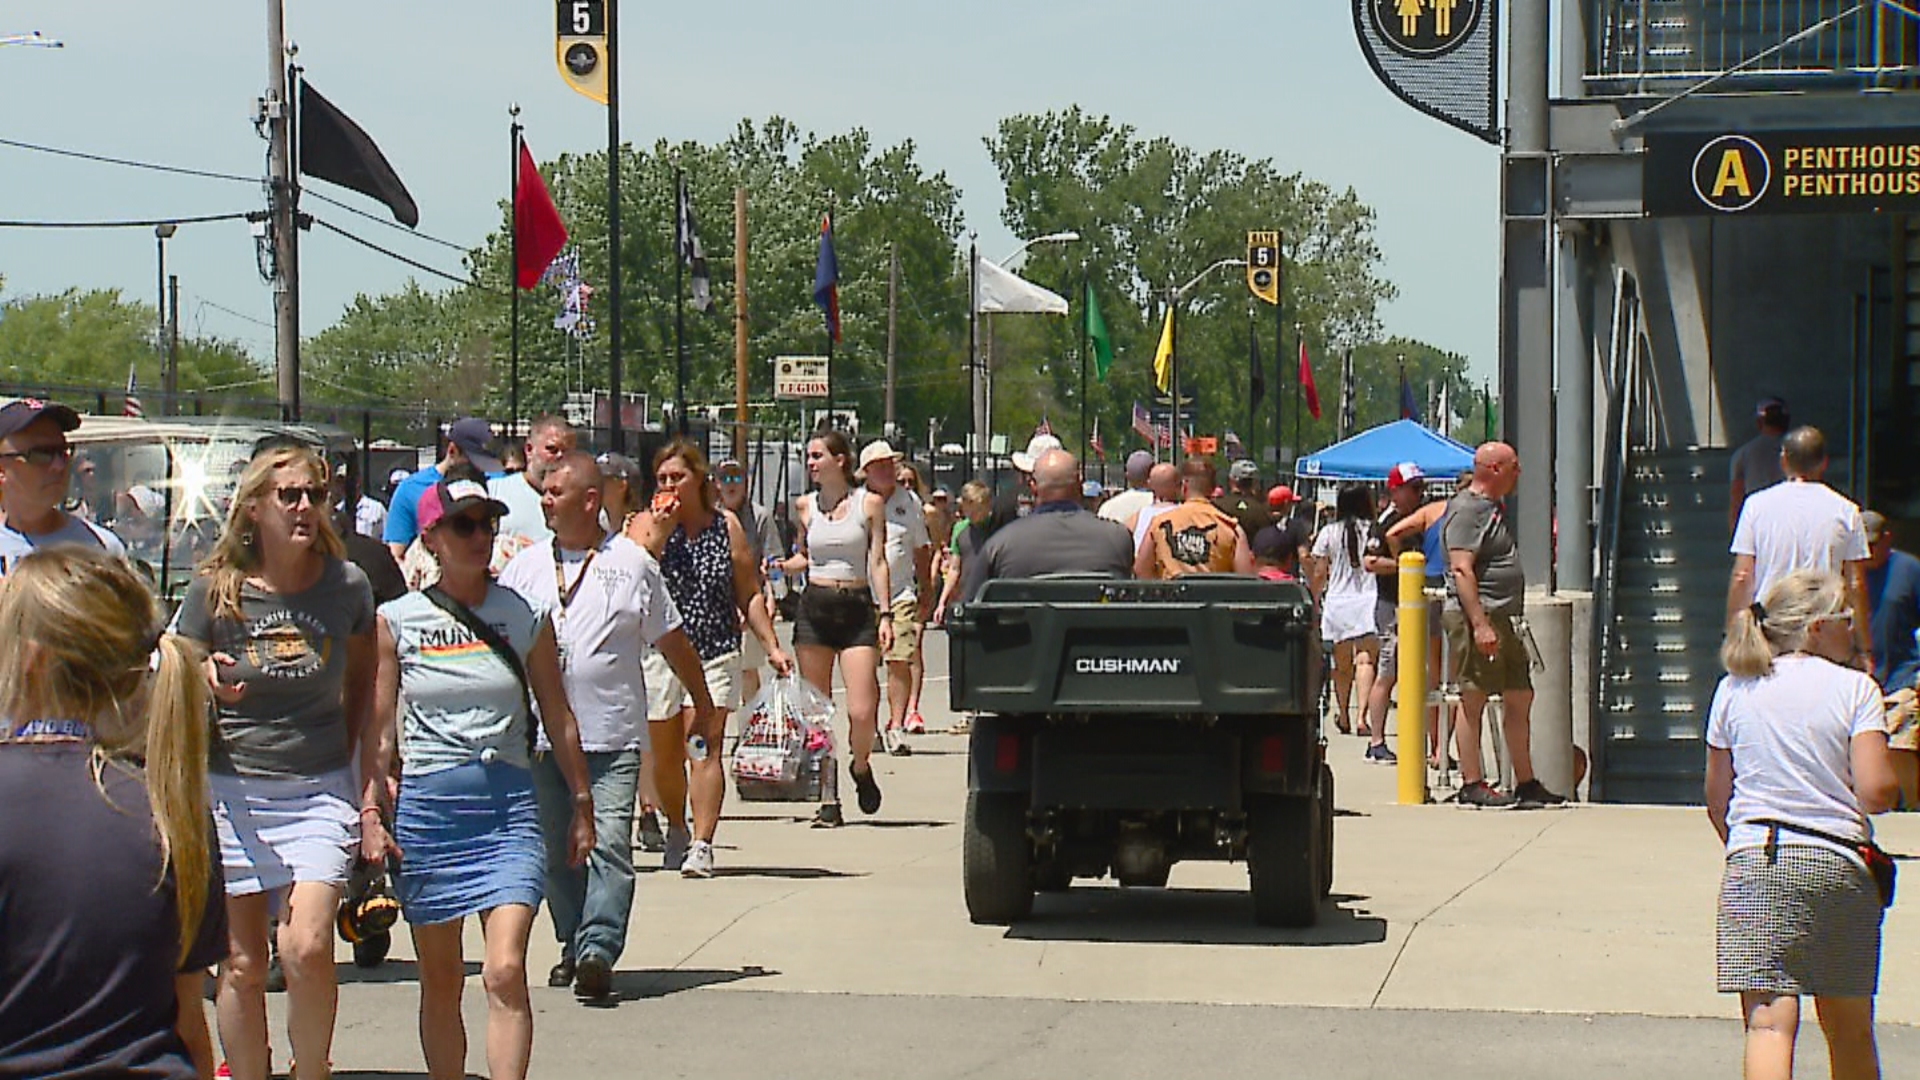 Clean up efforts underway Monday at Indianapolis Motor Speedway